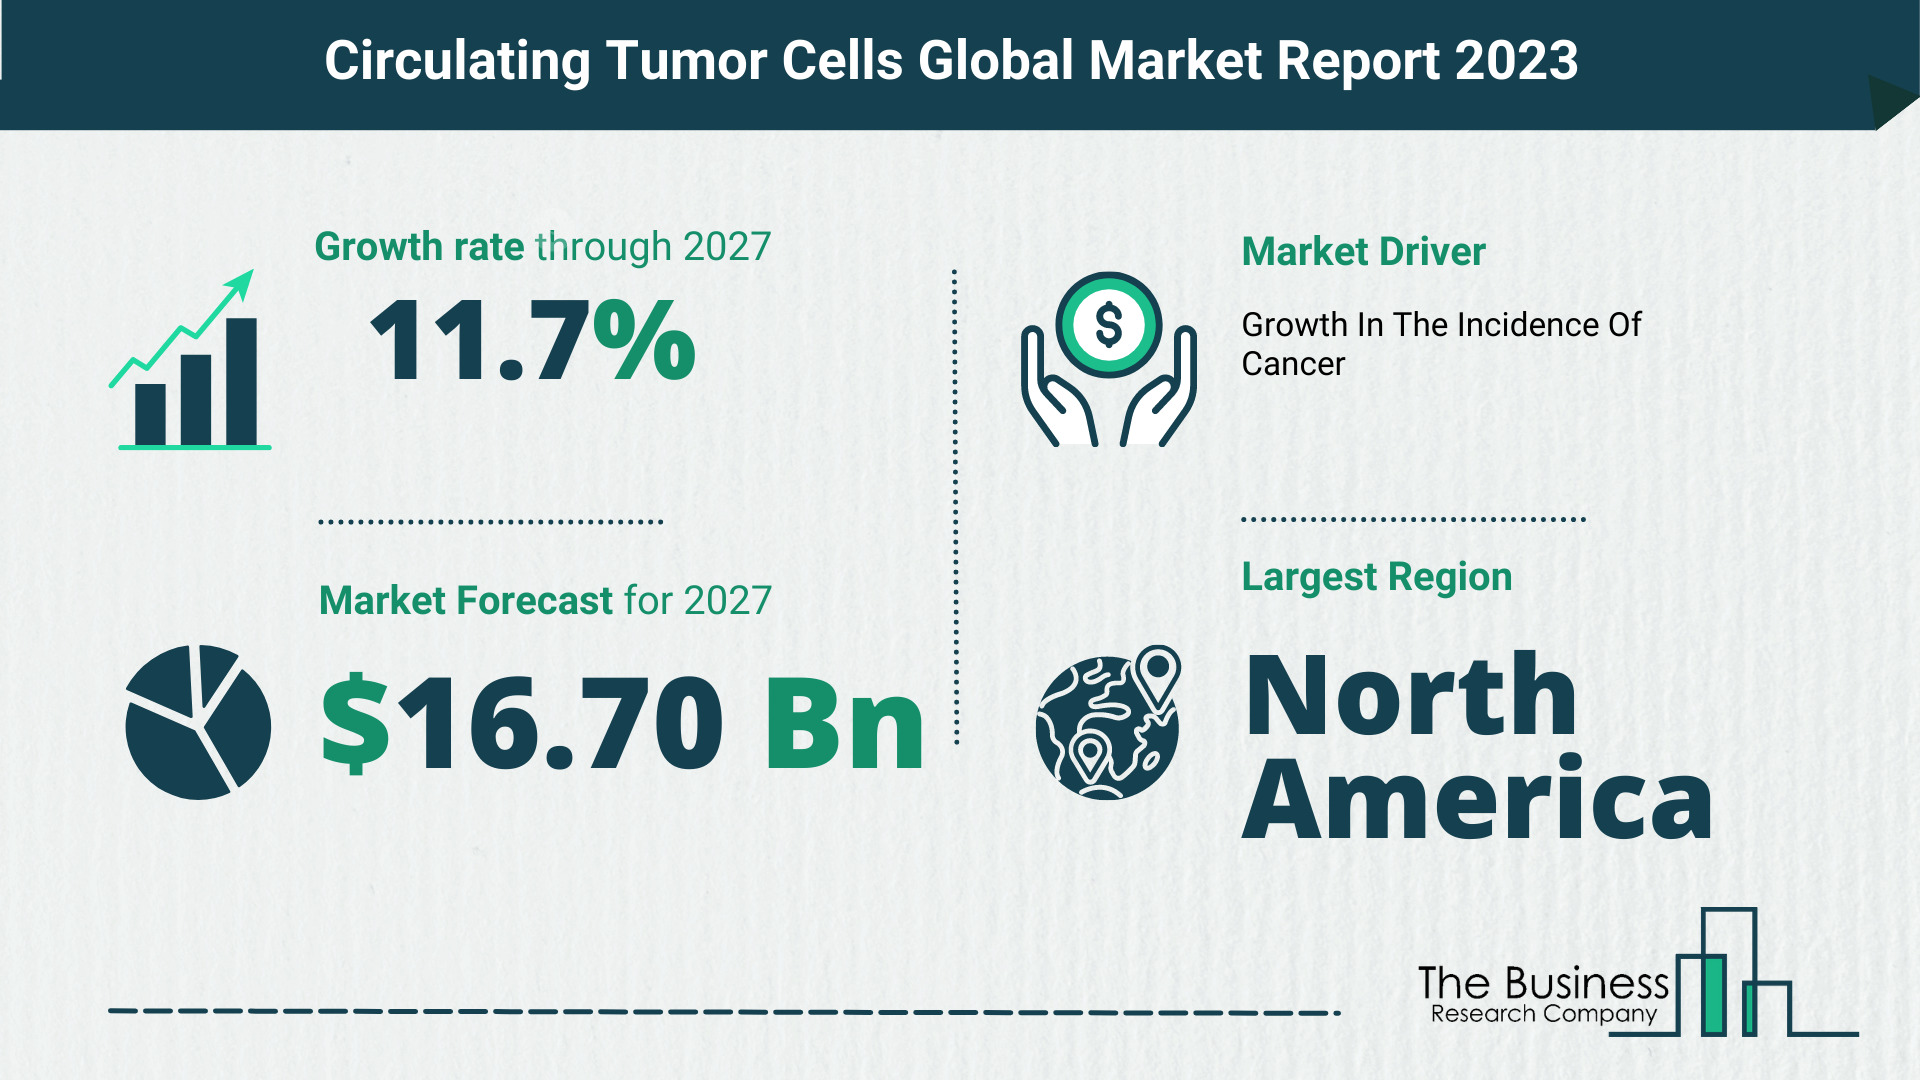 How Will The Circulating Tumor Cells Market Globally Expand In 2023?